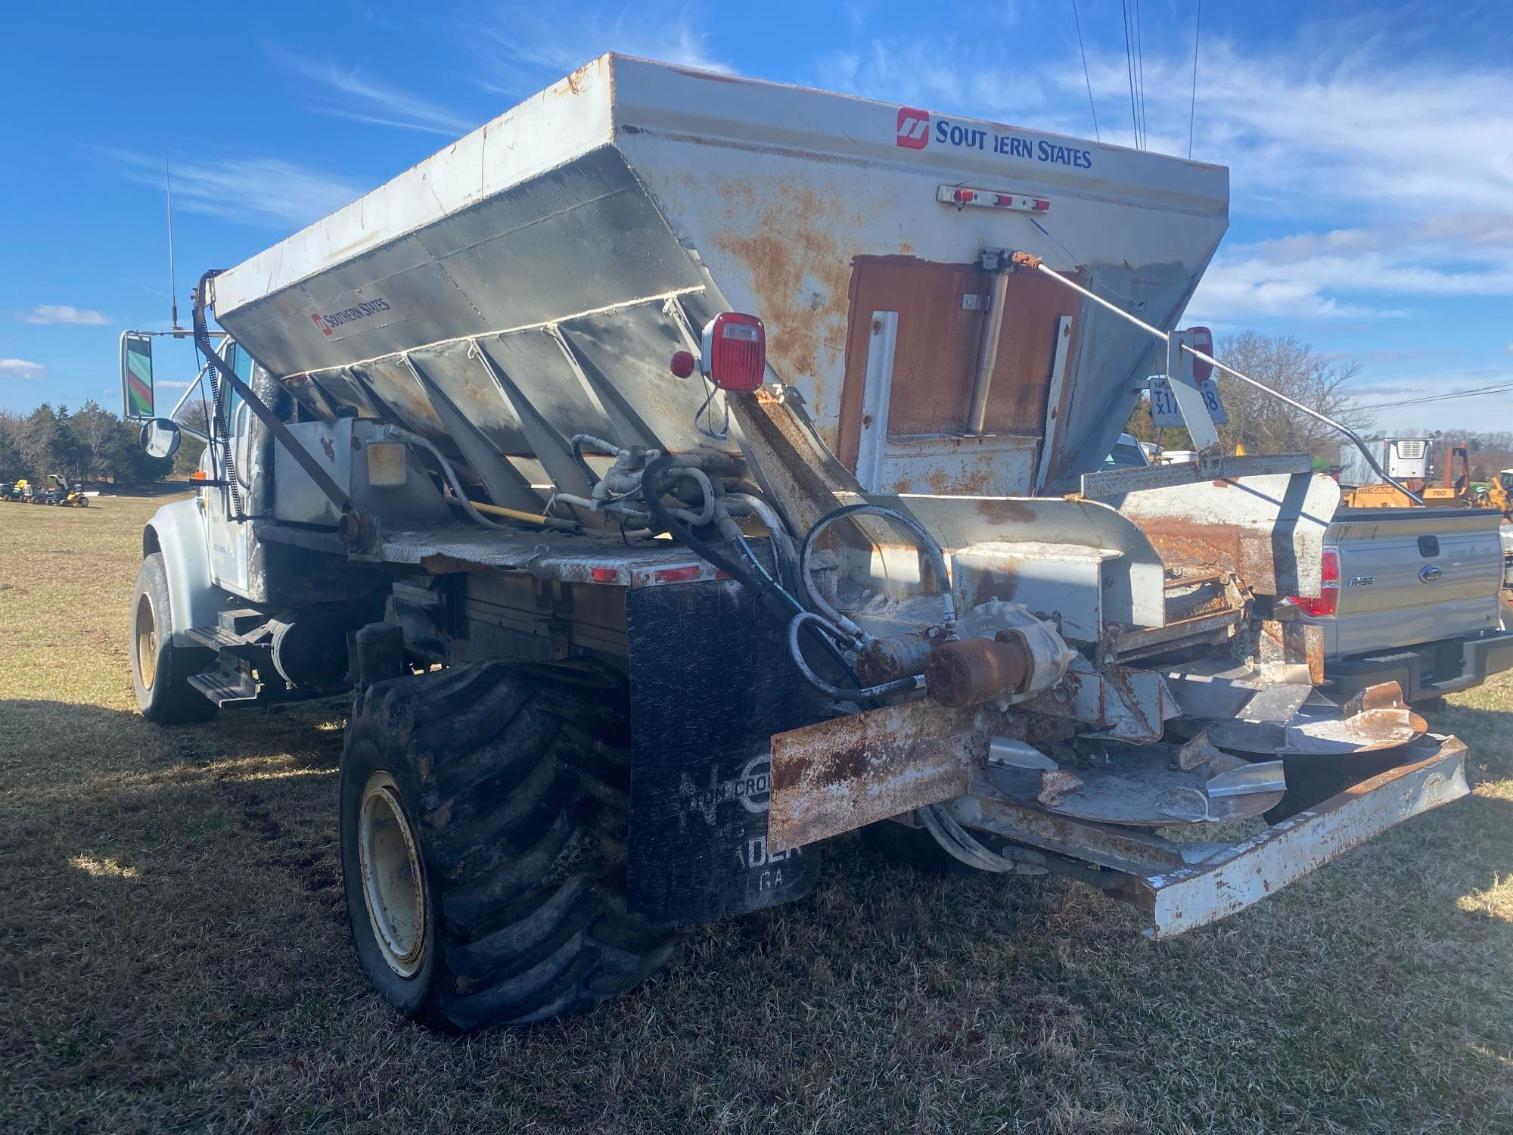 Image for 1996 International 4900, W Spreader Box and Tarp Cover VIN #: 1HTSDAAR6TH351827 Mileage: 133,149, Bad Rear Differential per Seller